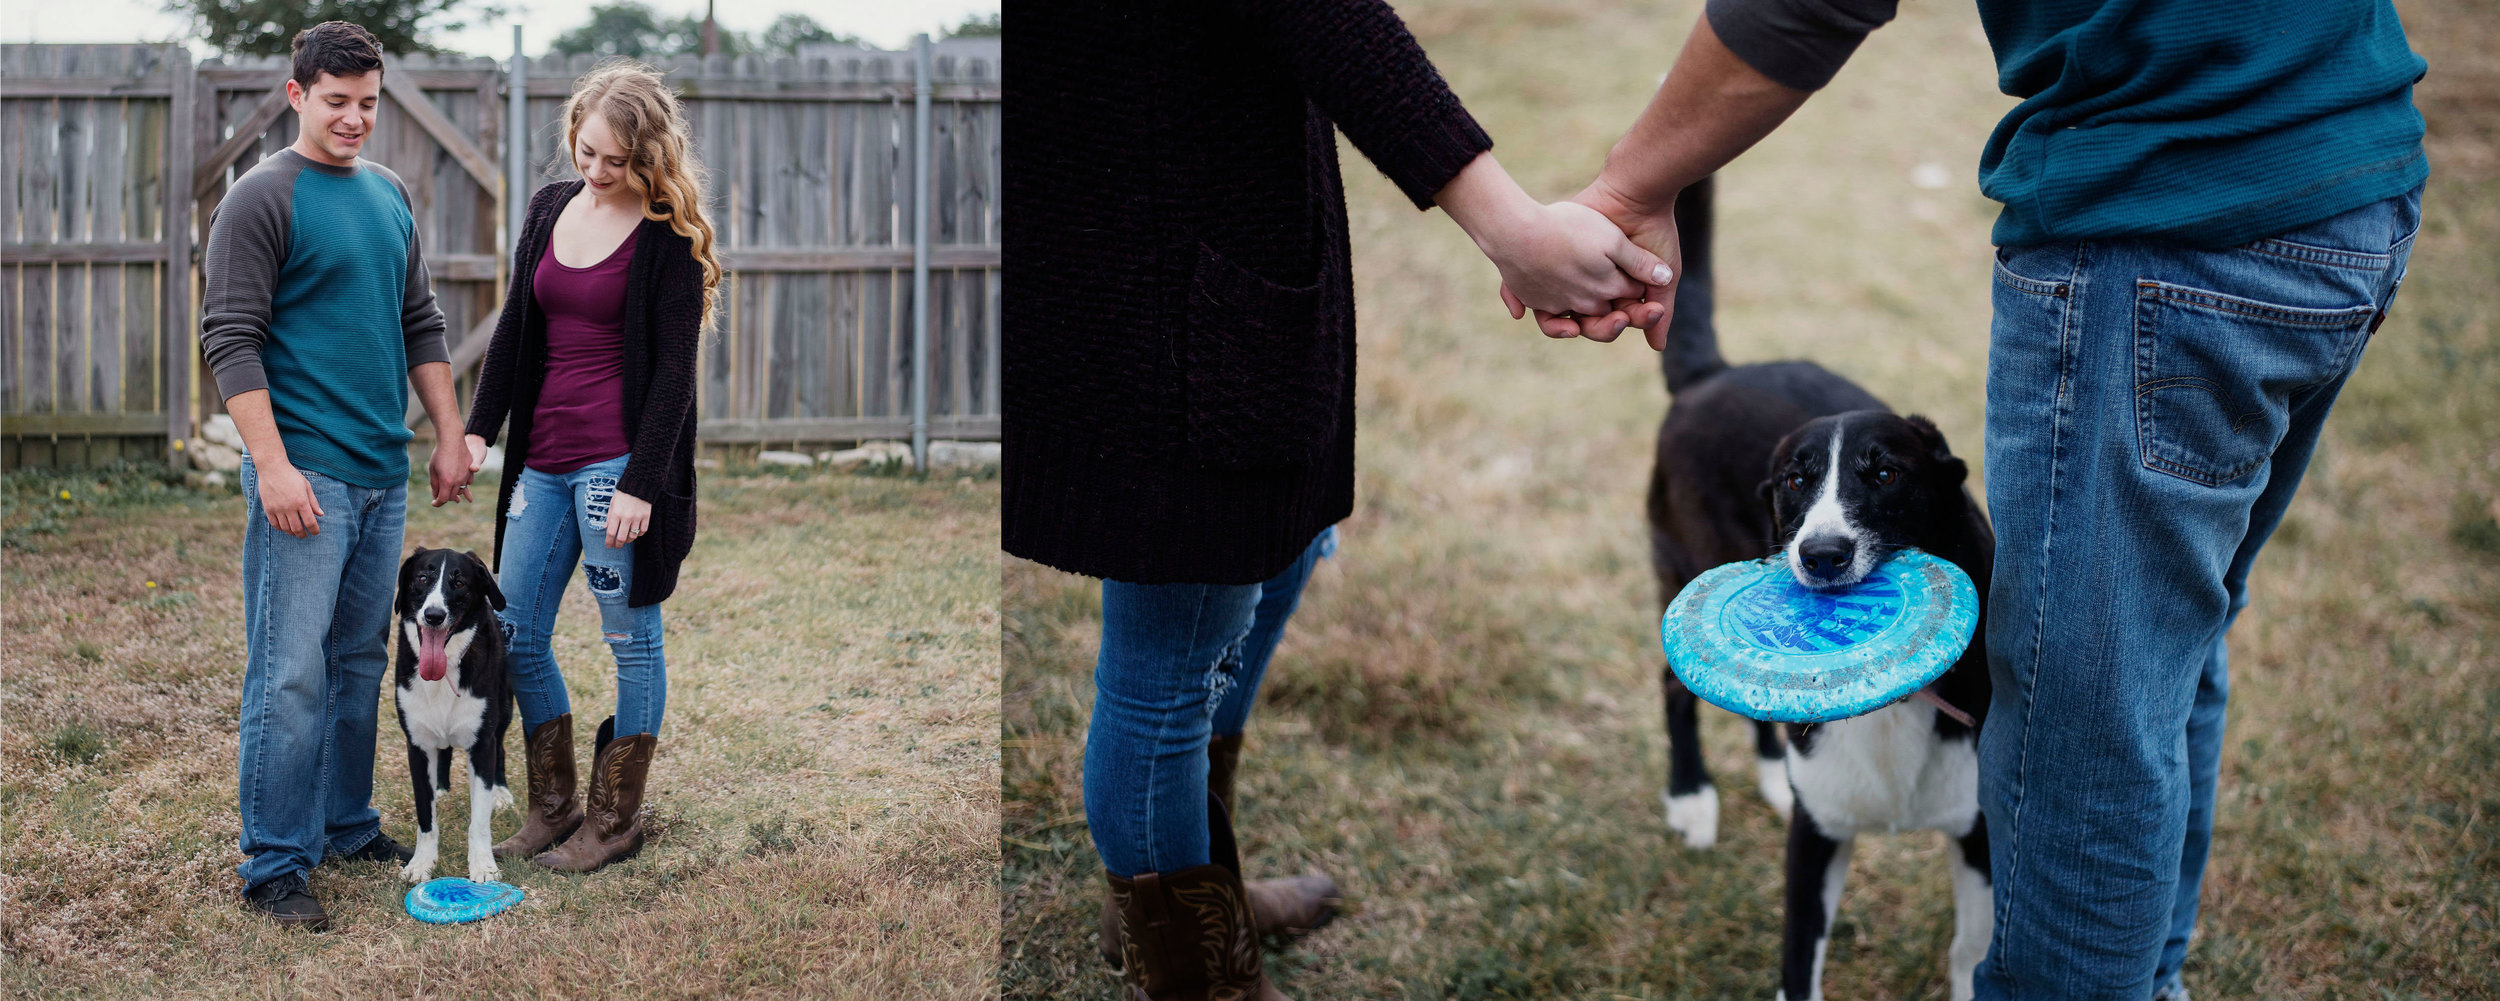 EffJay Photography Lees Summit Family Photographer inhome Lifestyle Session with dogs011.jpg